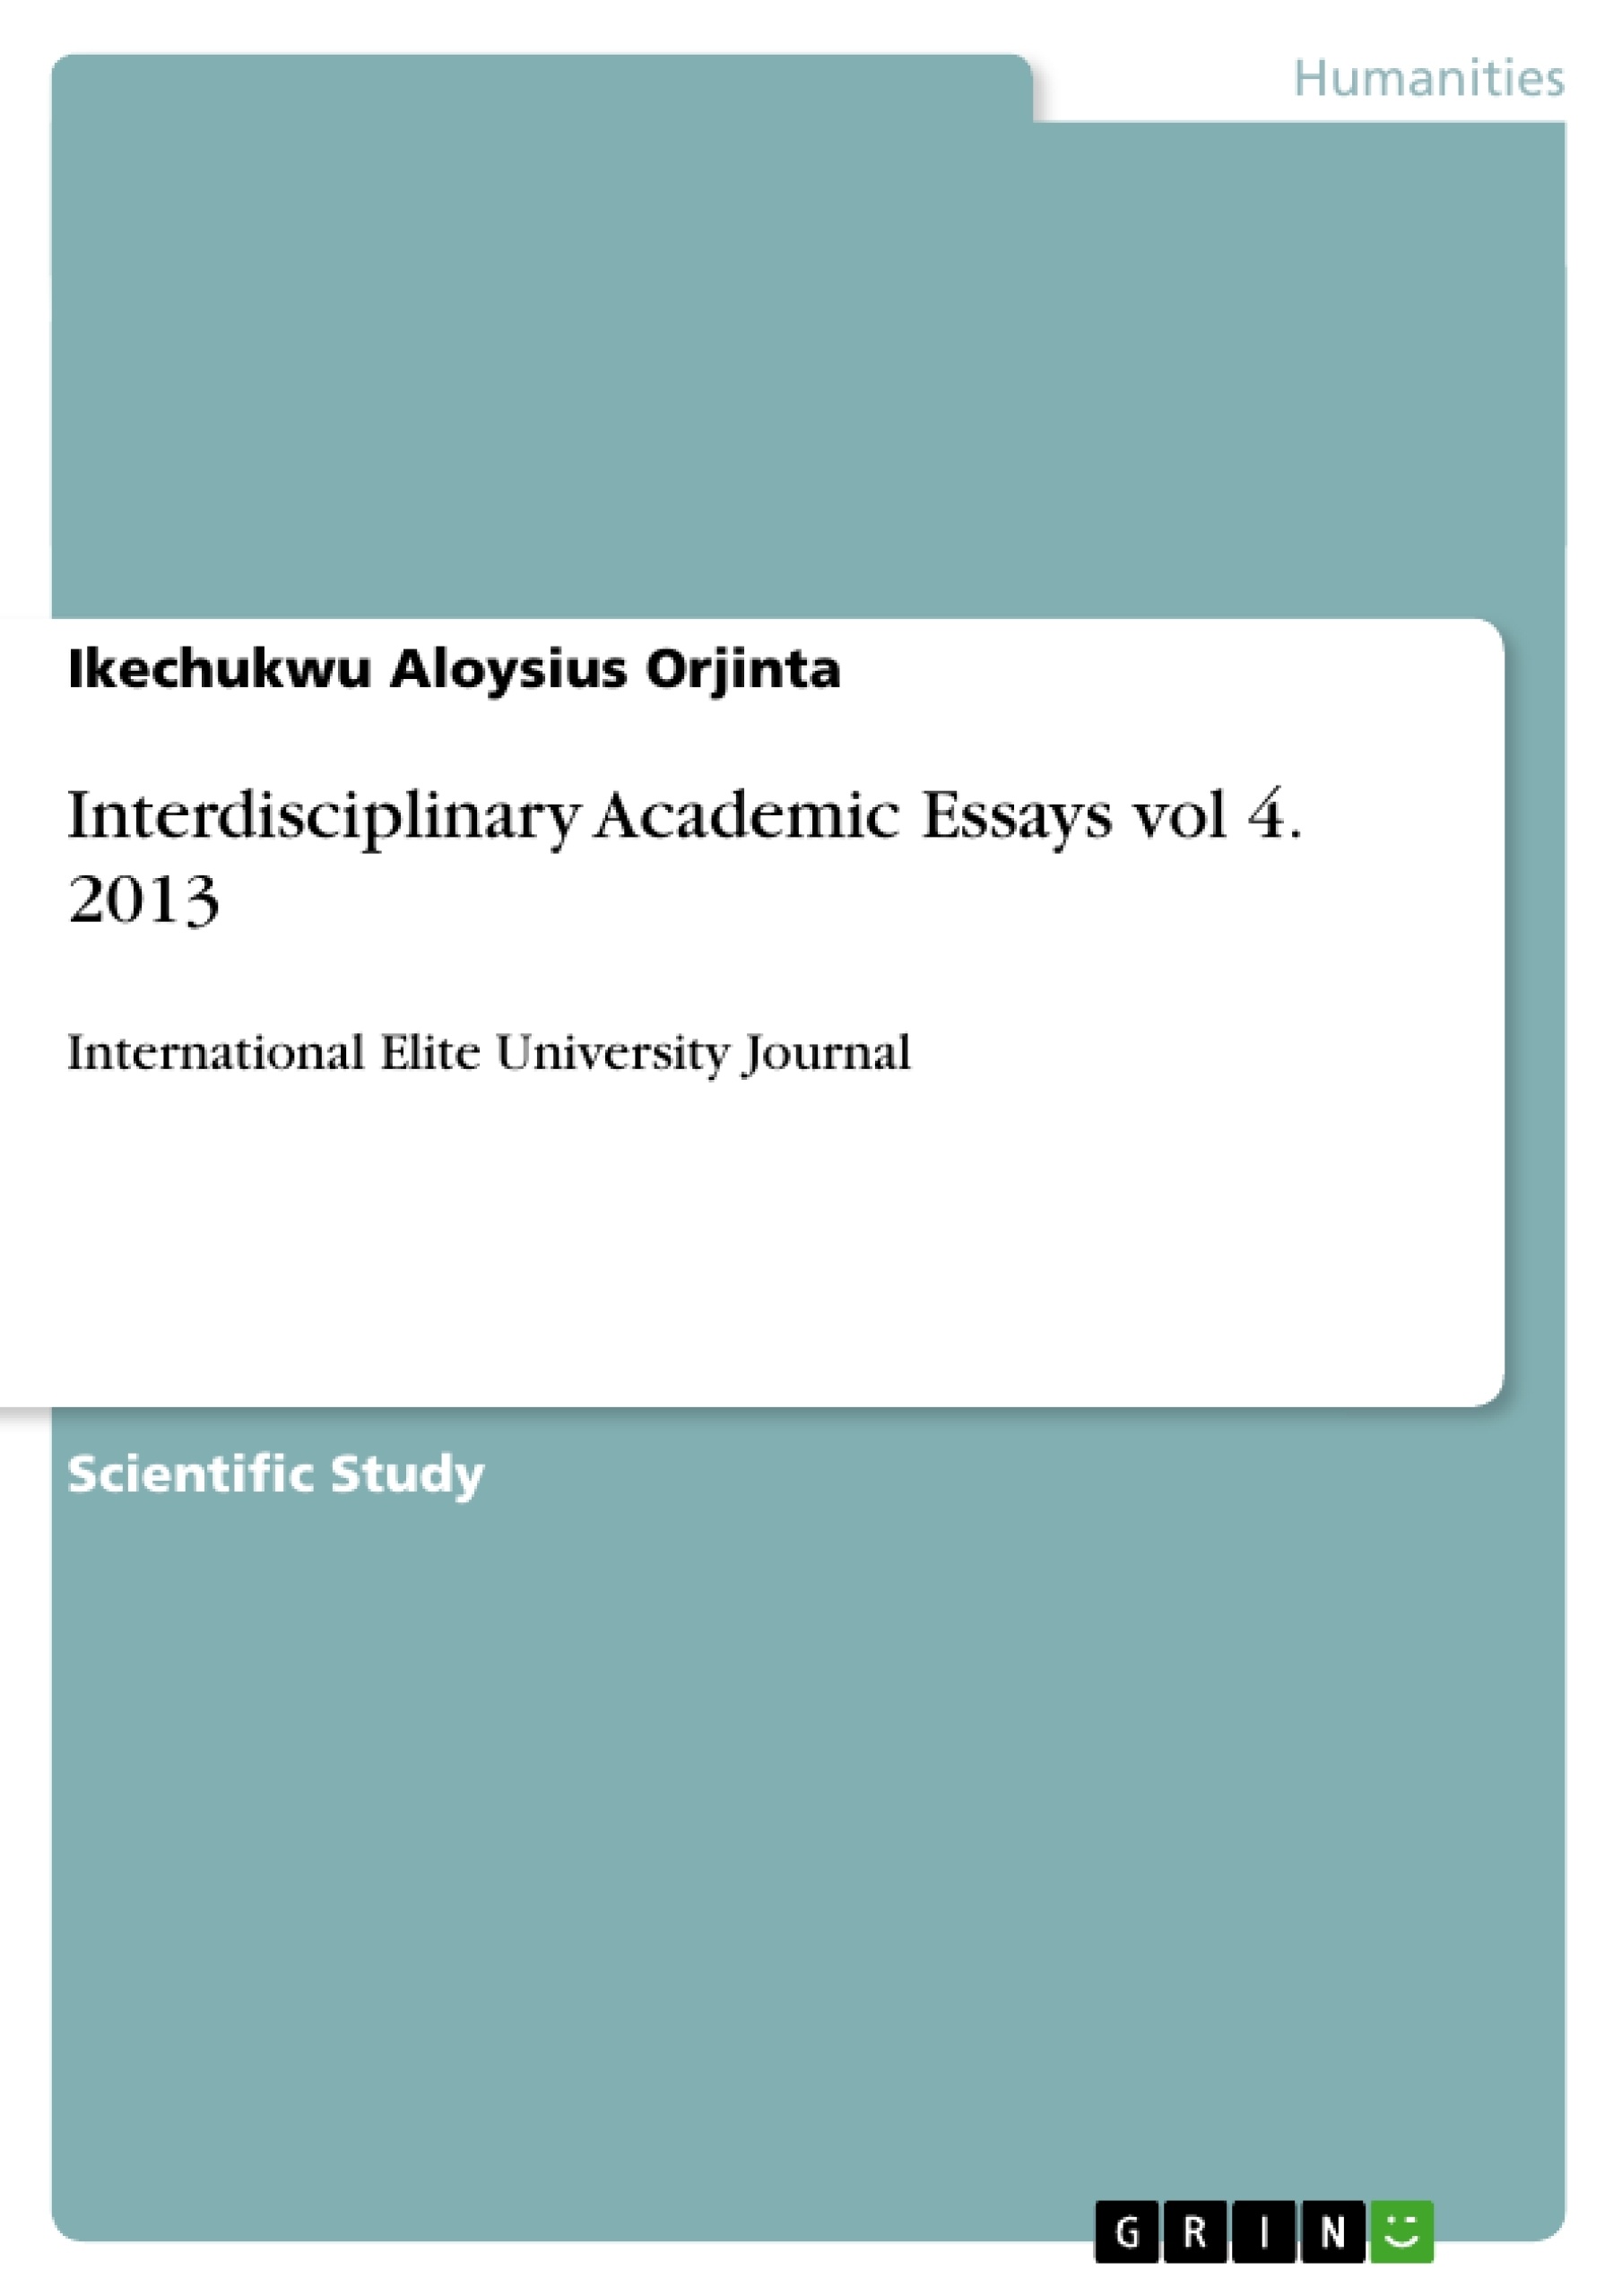 Essay on corruption journal for the scientific study